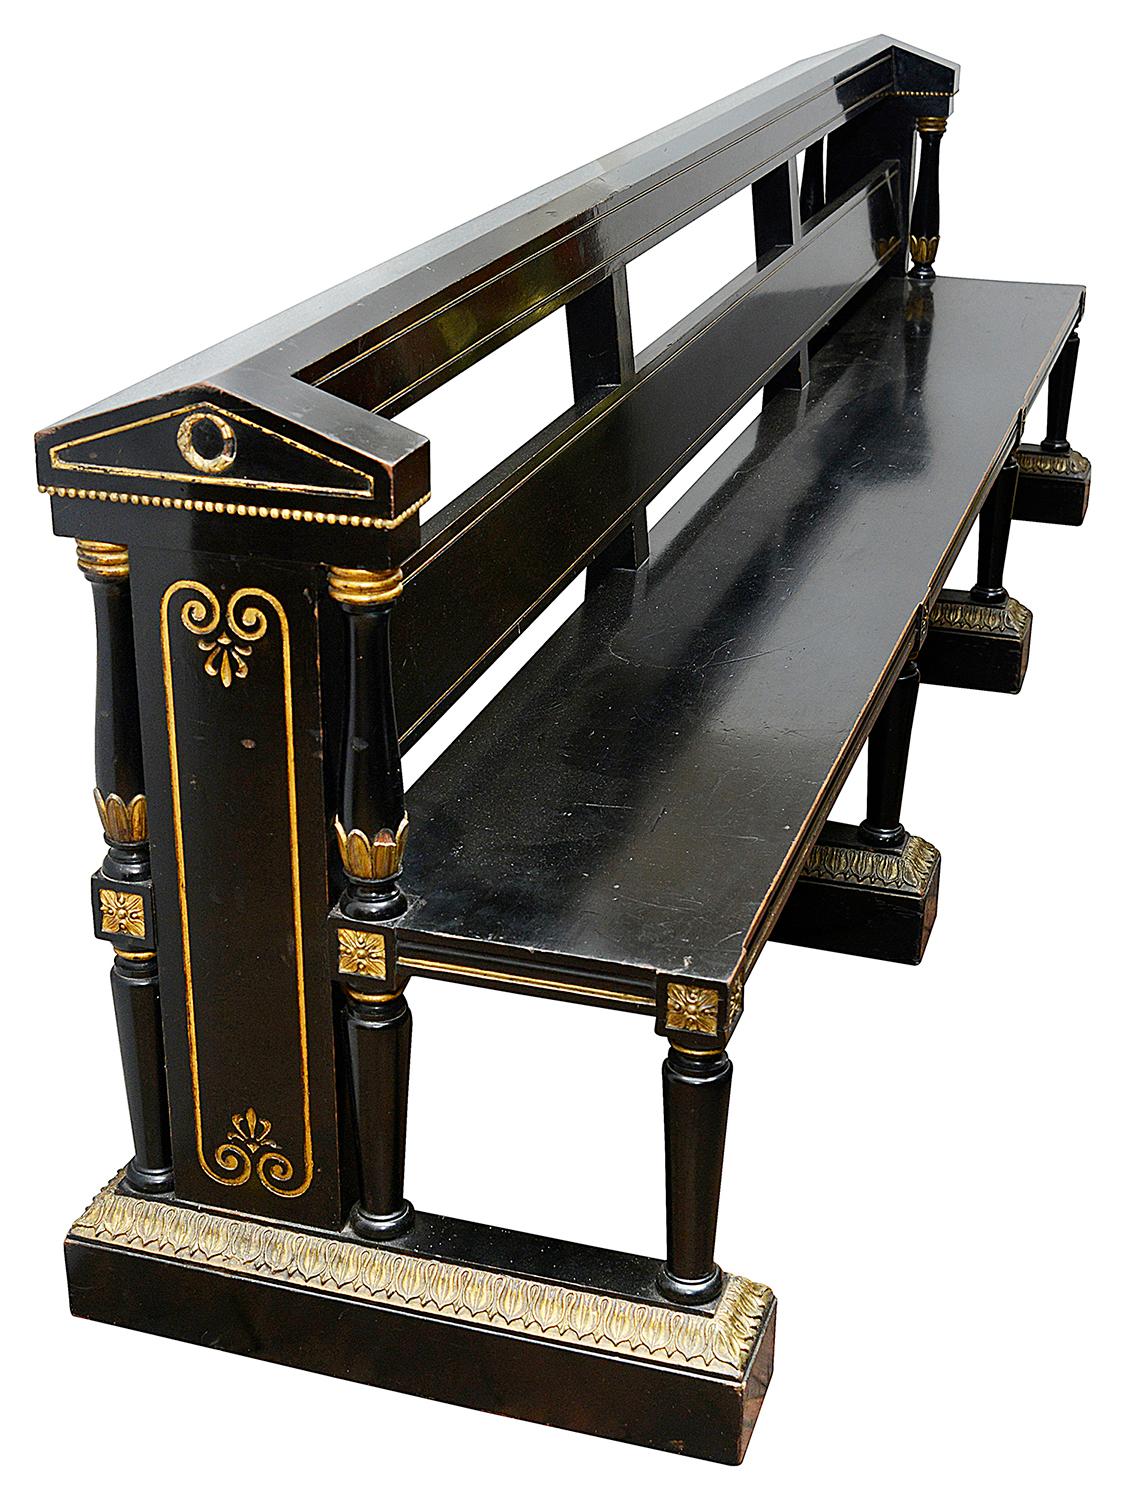 A very good quality pair of architectural 19th century Aesthetic movement ebonized hall benches, each with classical column and motif gilded decoration to the ends and raised on turned tapering supports and plinth bases.